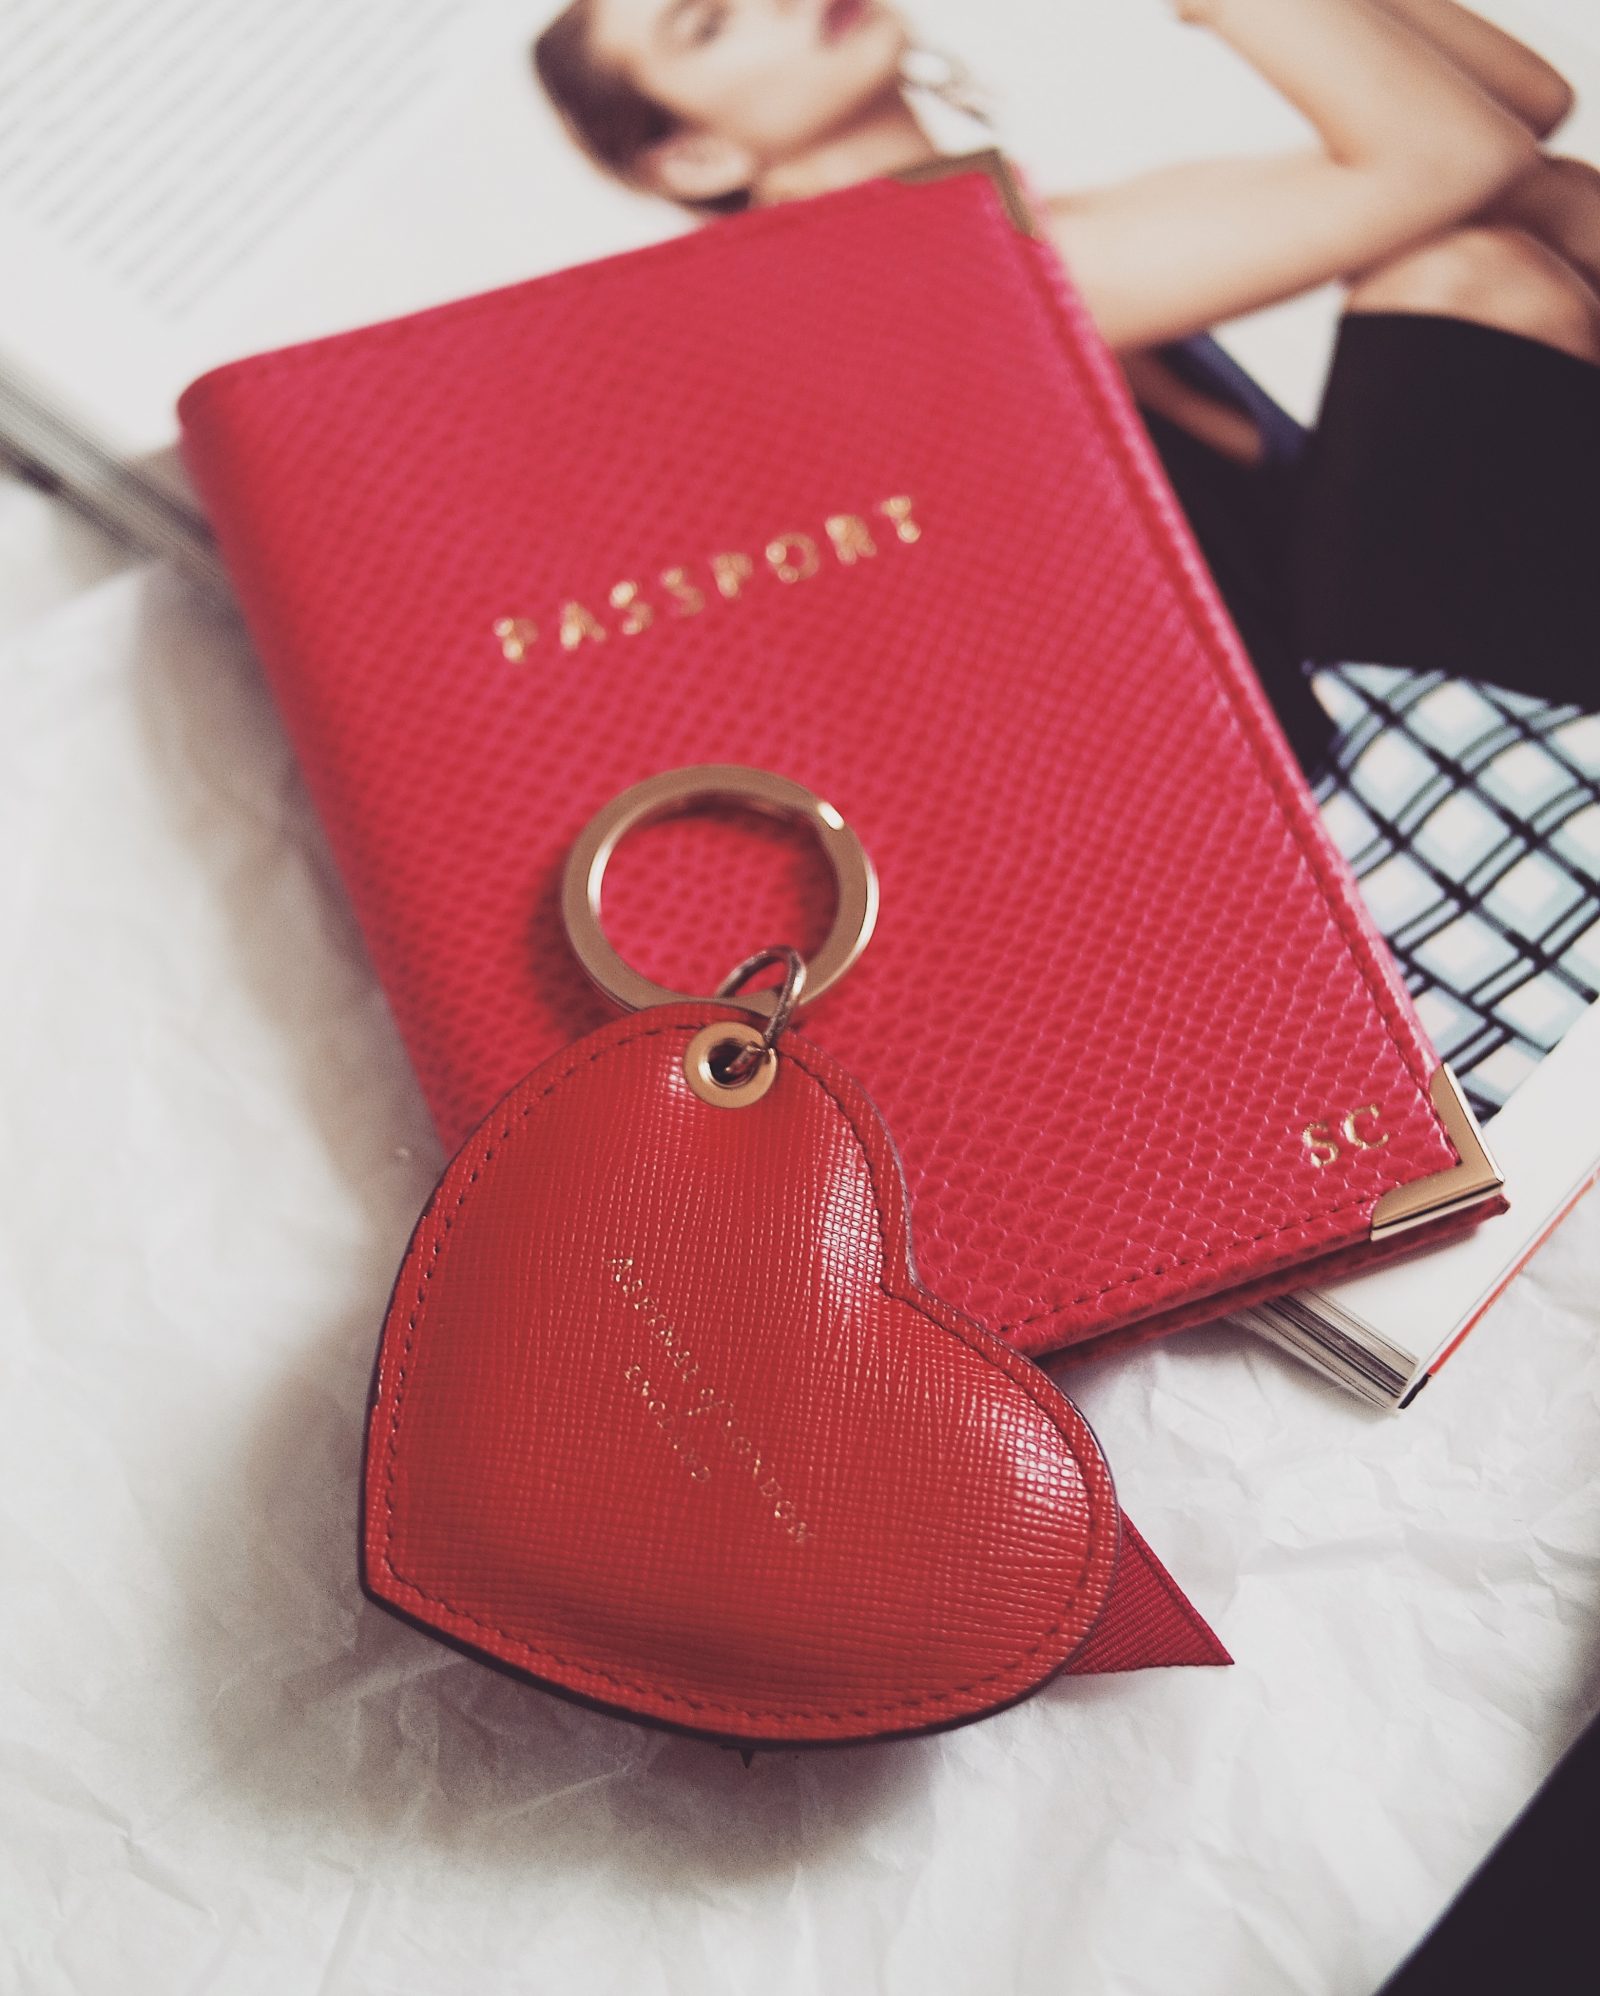 Gift guide for her - Aspinal Passport Holder